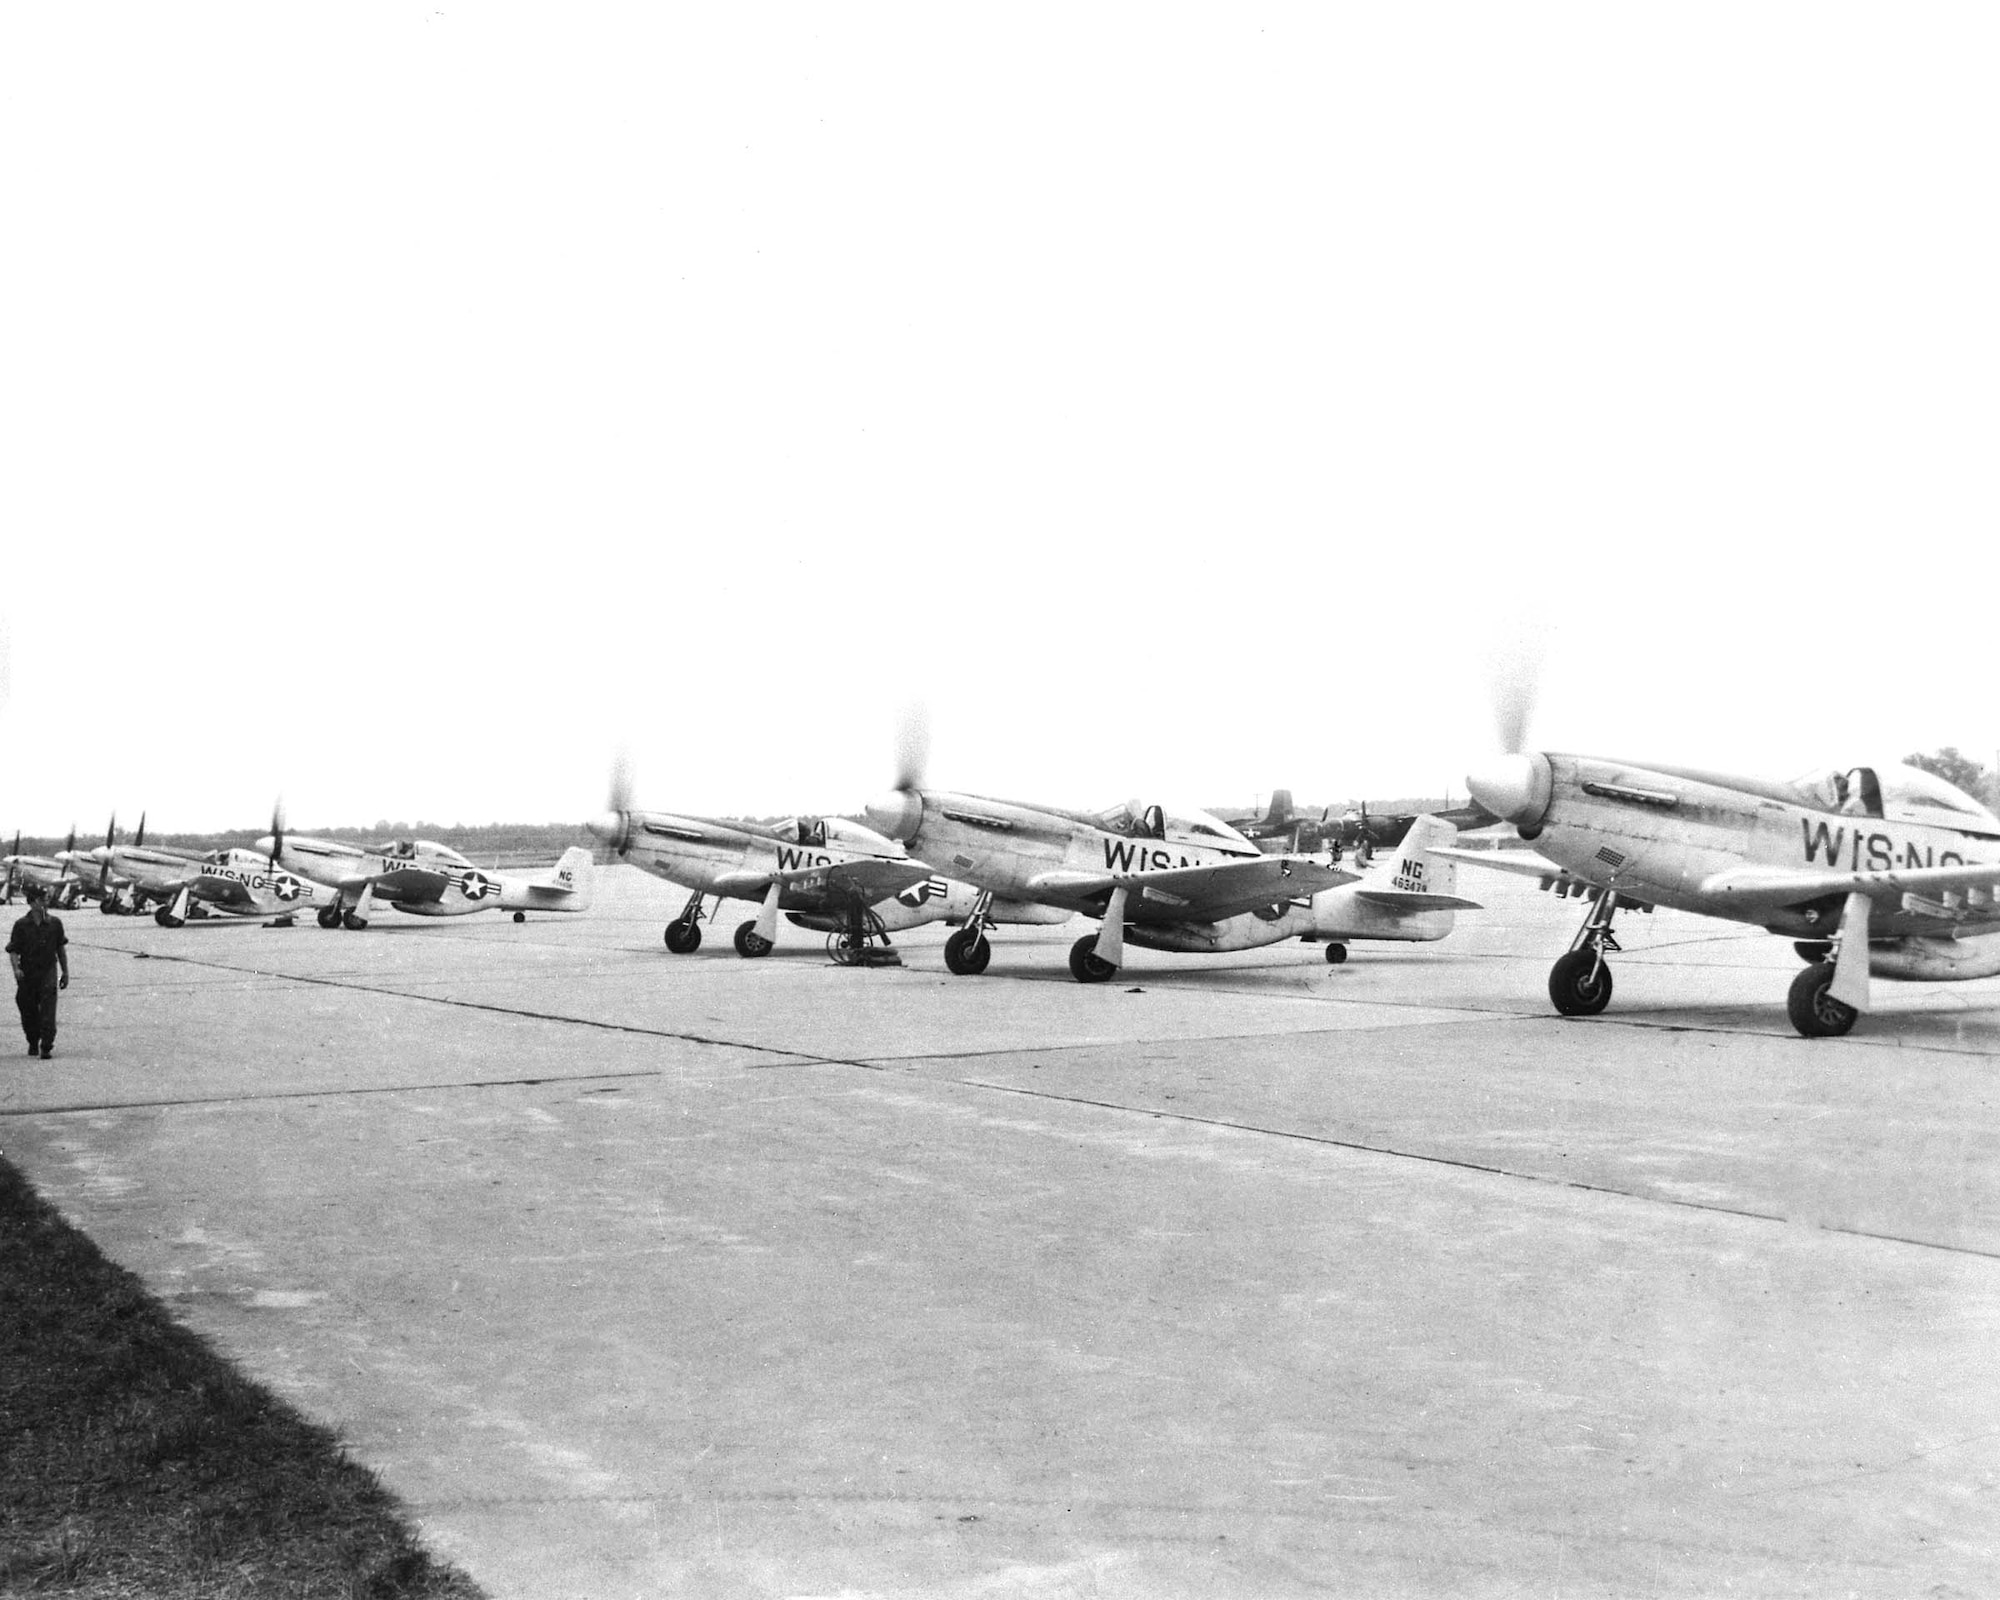 P-51D "Mustangs" warm up on the flight line. The Mustang was flown from 1947-1949 and from 1952-1953.